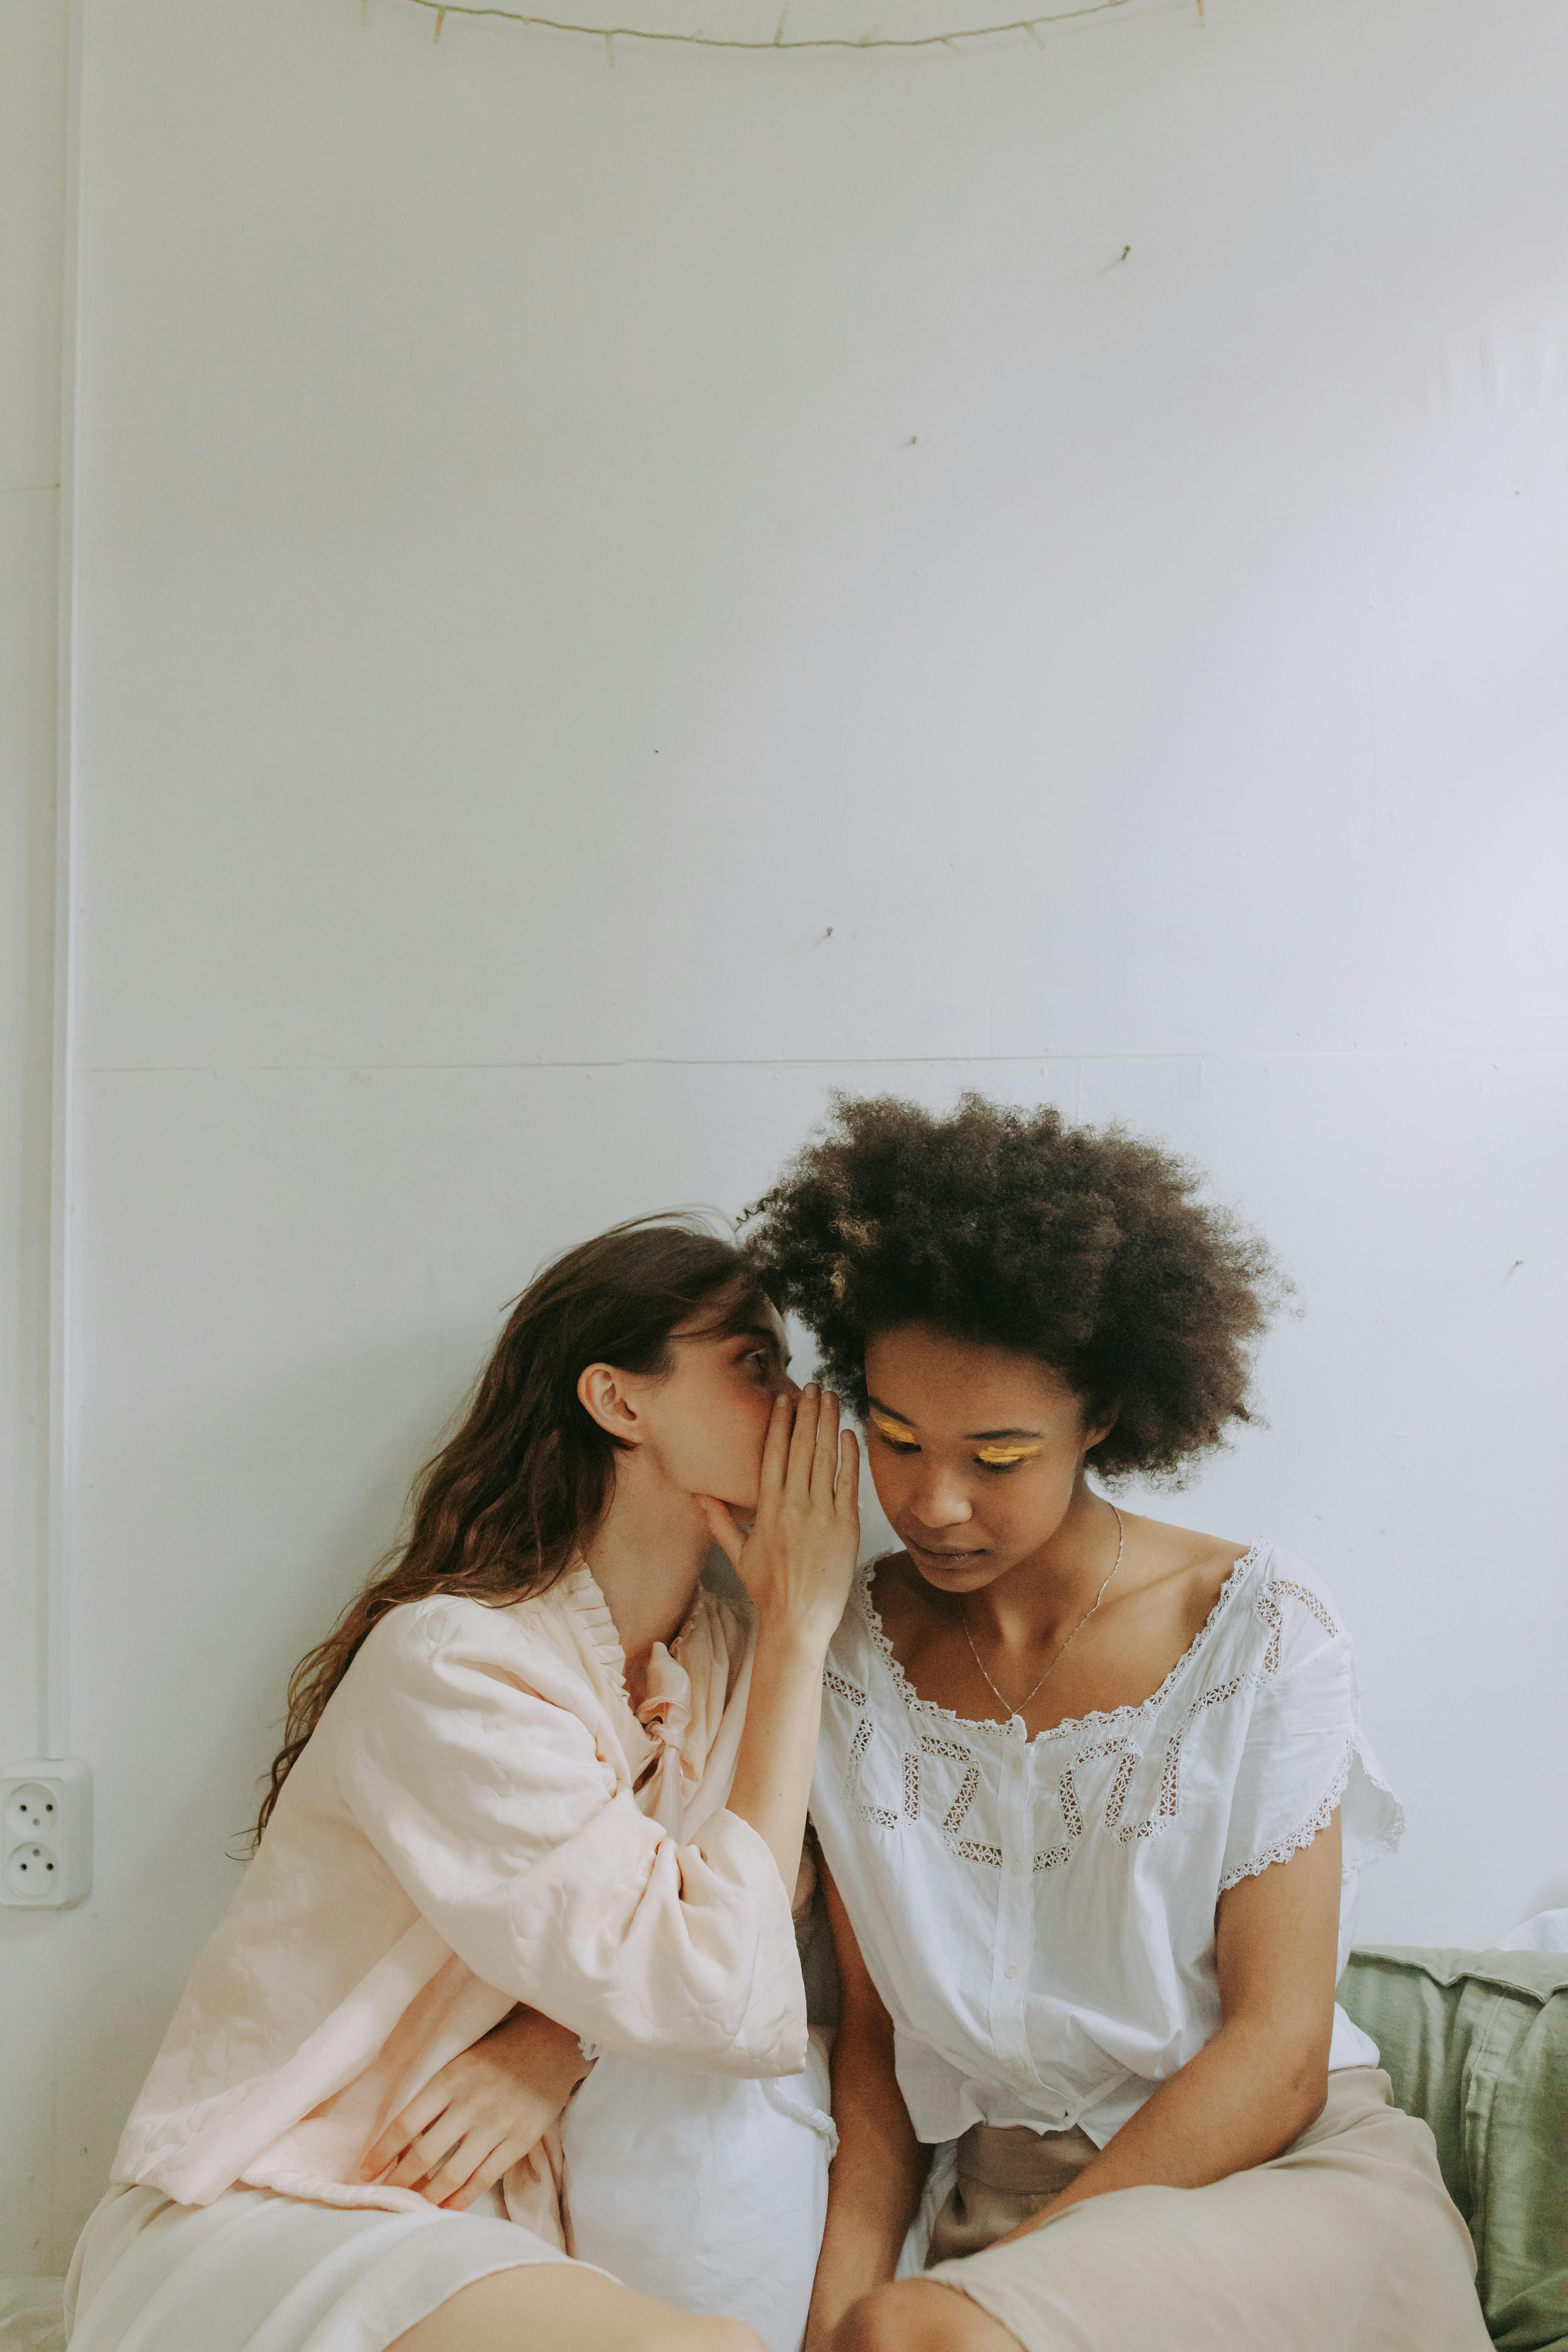 A woman whispering something to another person | Source: Pexels